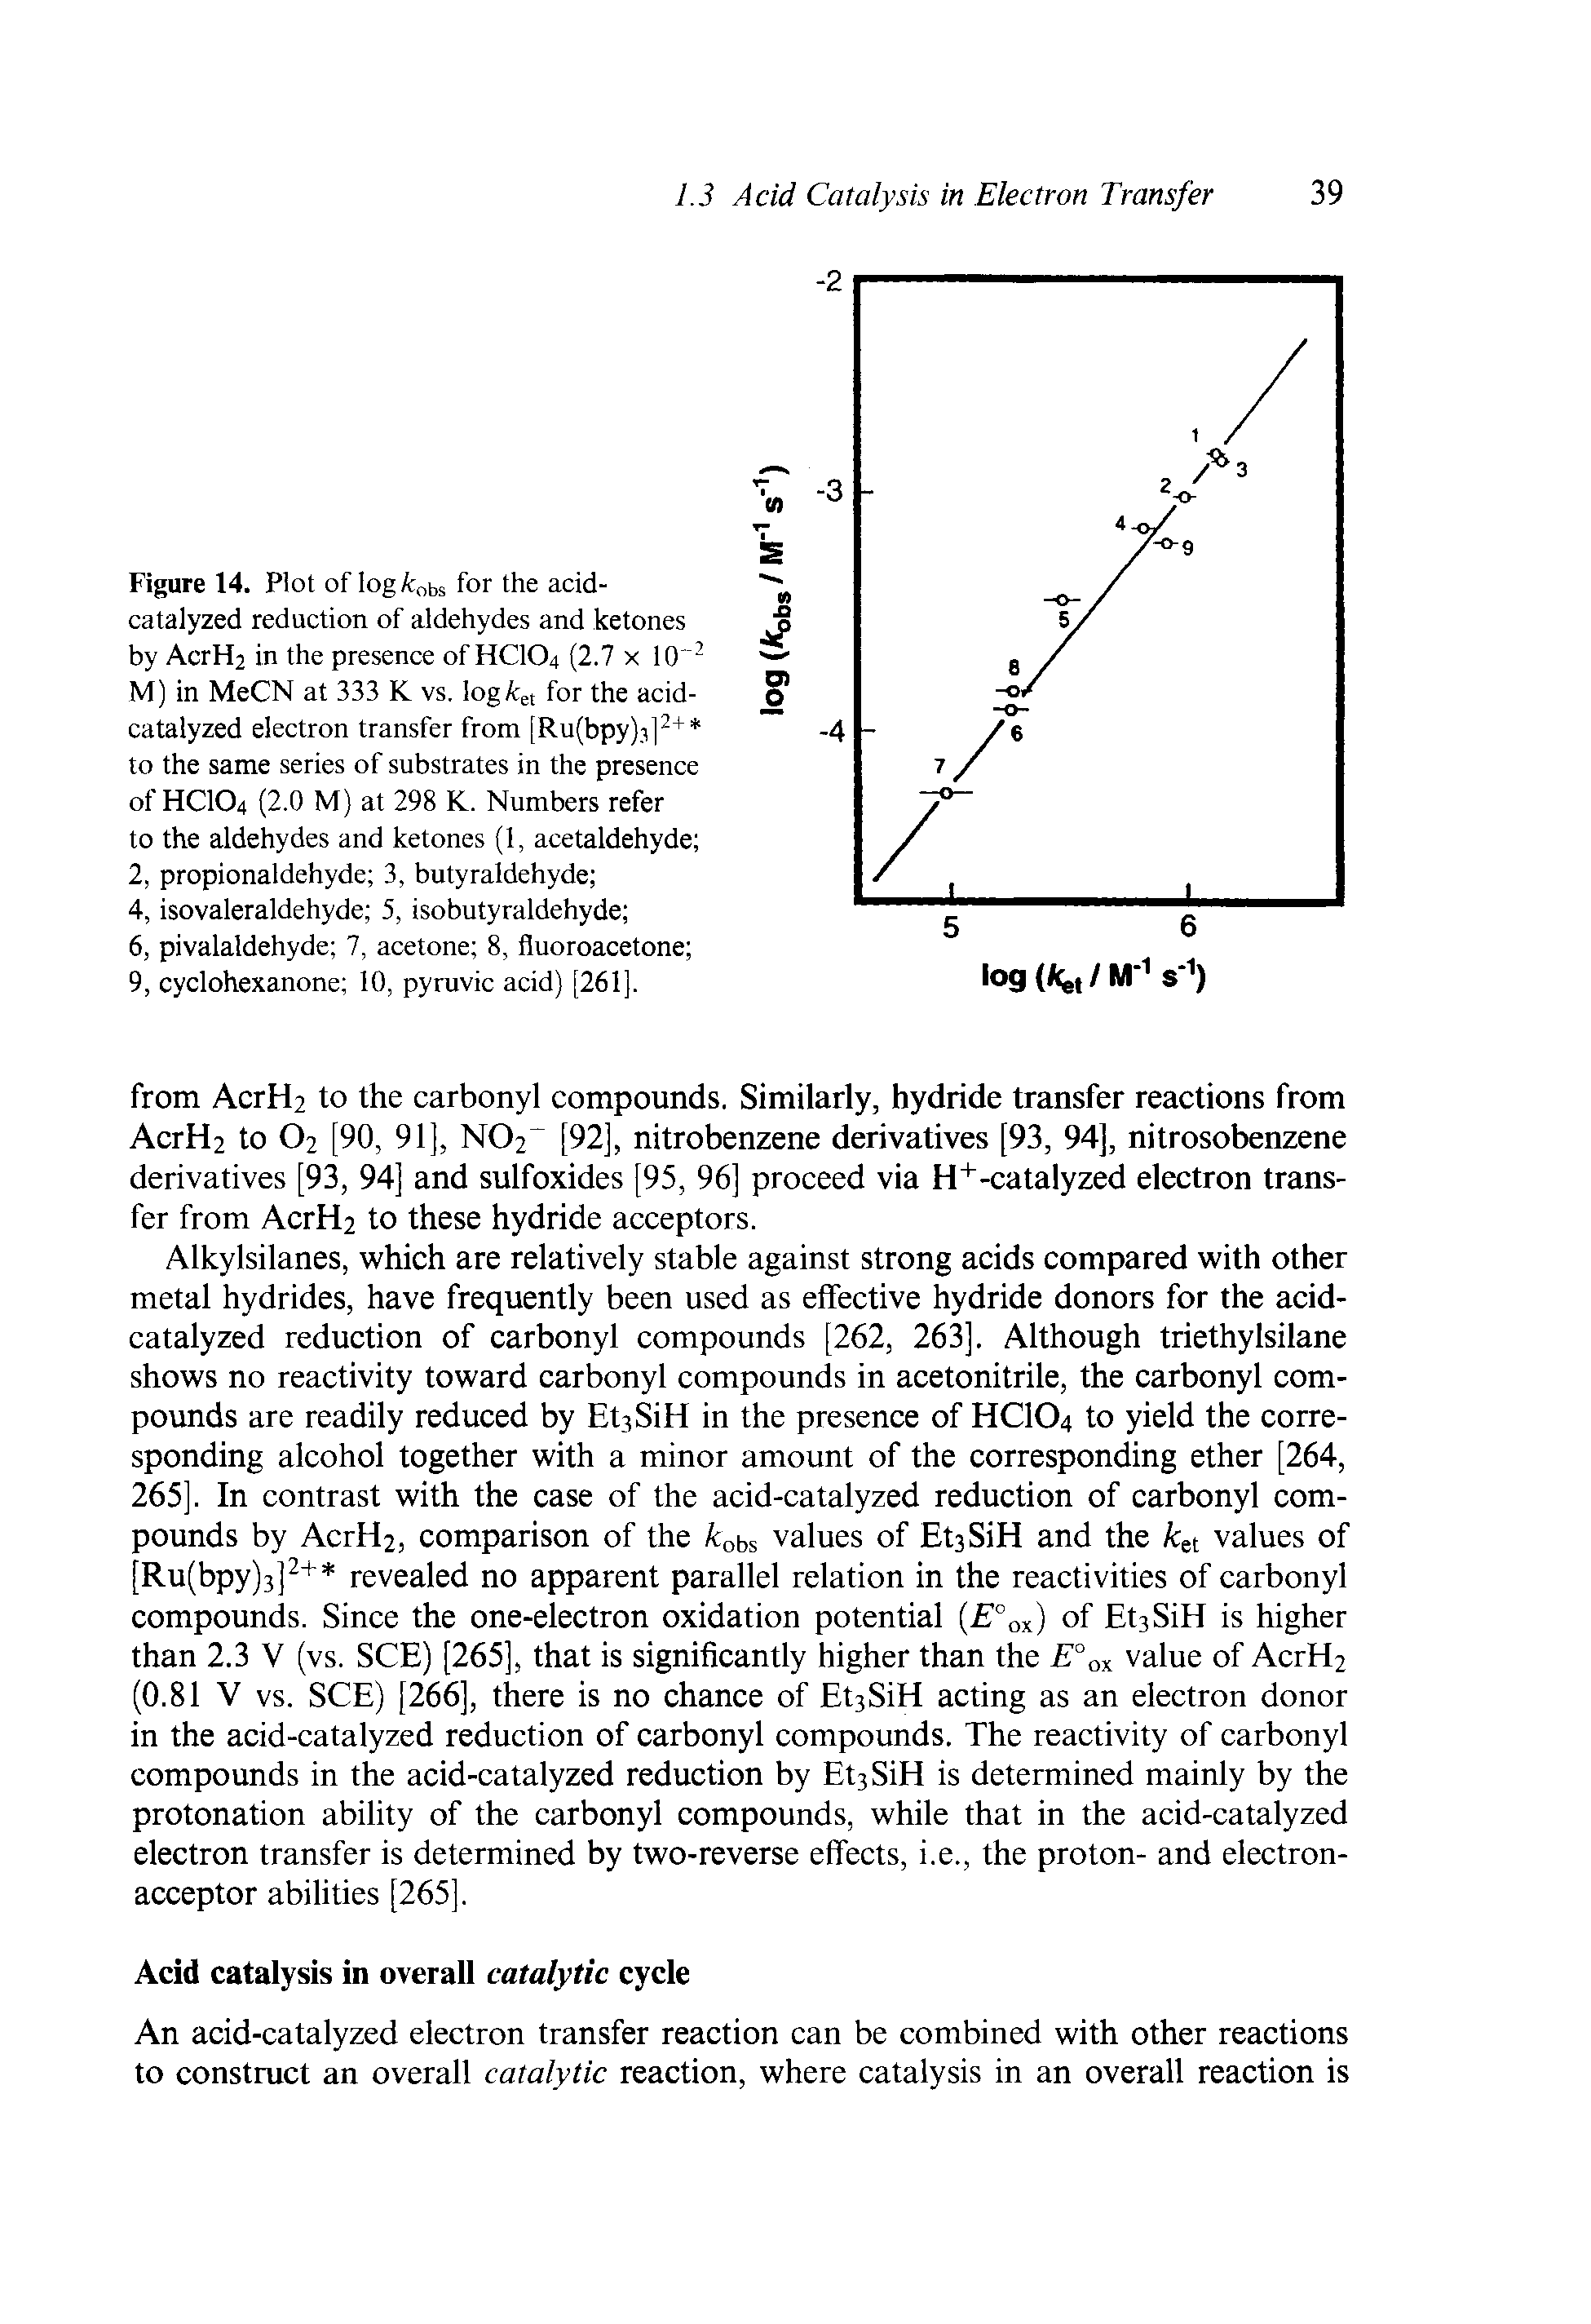 Figure 14. Plot of logfcobs for the acid-catalyzed reduction of aldehydes and ketones by AcrH2 in the presence of HCIO4 (2.7 x 10 M) in MeCN at 333 K vs. logfcet for the acid-catalyzed electron transfer from [Ru(bpy),il + to the same series of substrates in the presence of HCIO4 (2.0 M) at 298 K. Numbers refer to the aldehydes and ketones (1, acetaldehyde 2, propionaldehyde 3, butyraldehyde ...